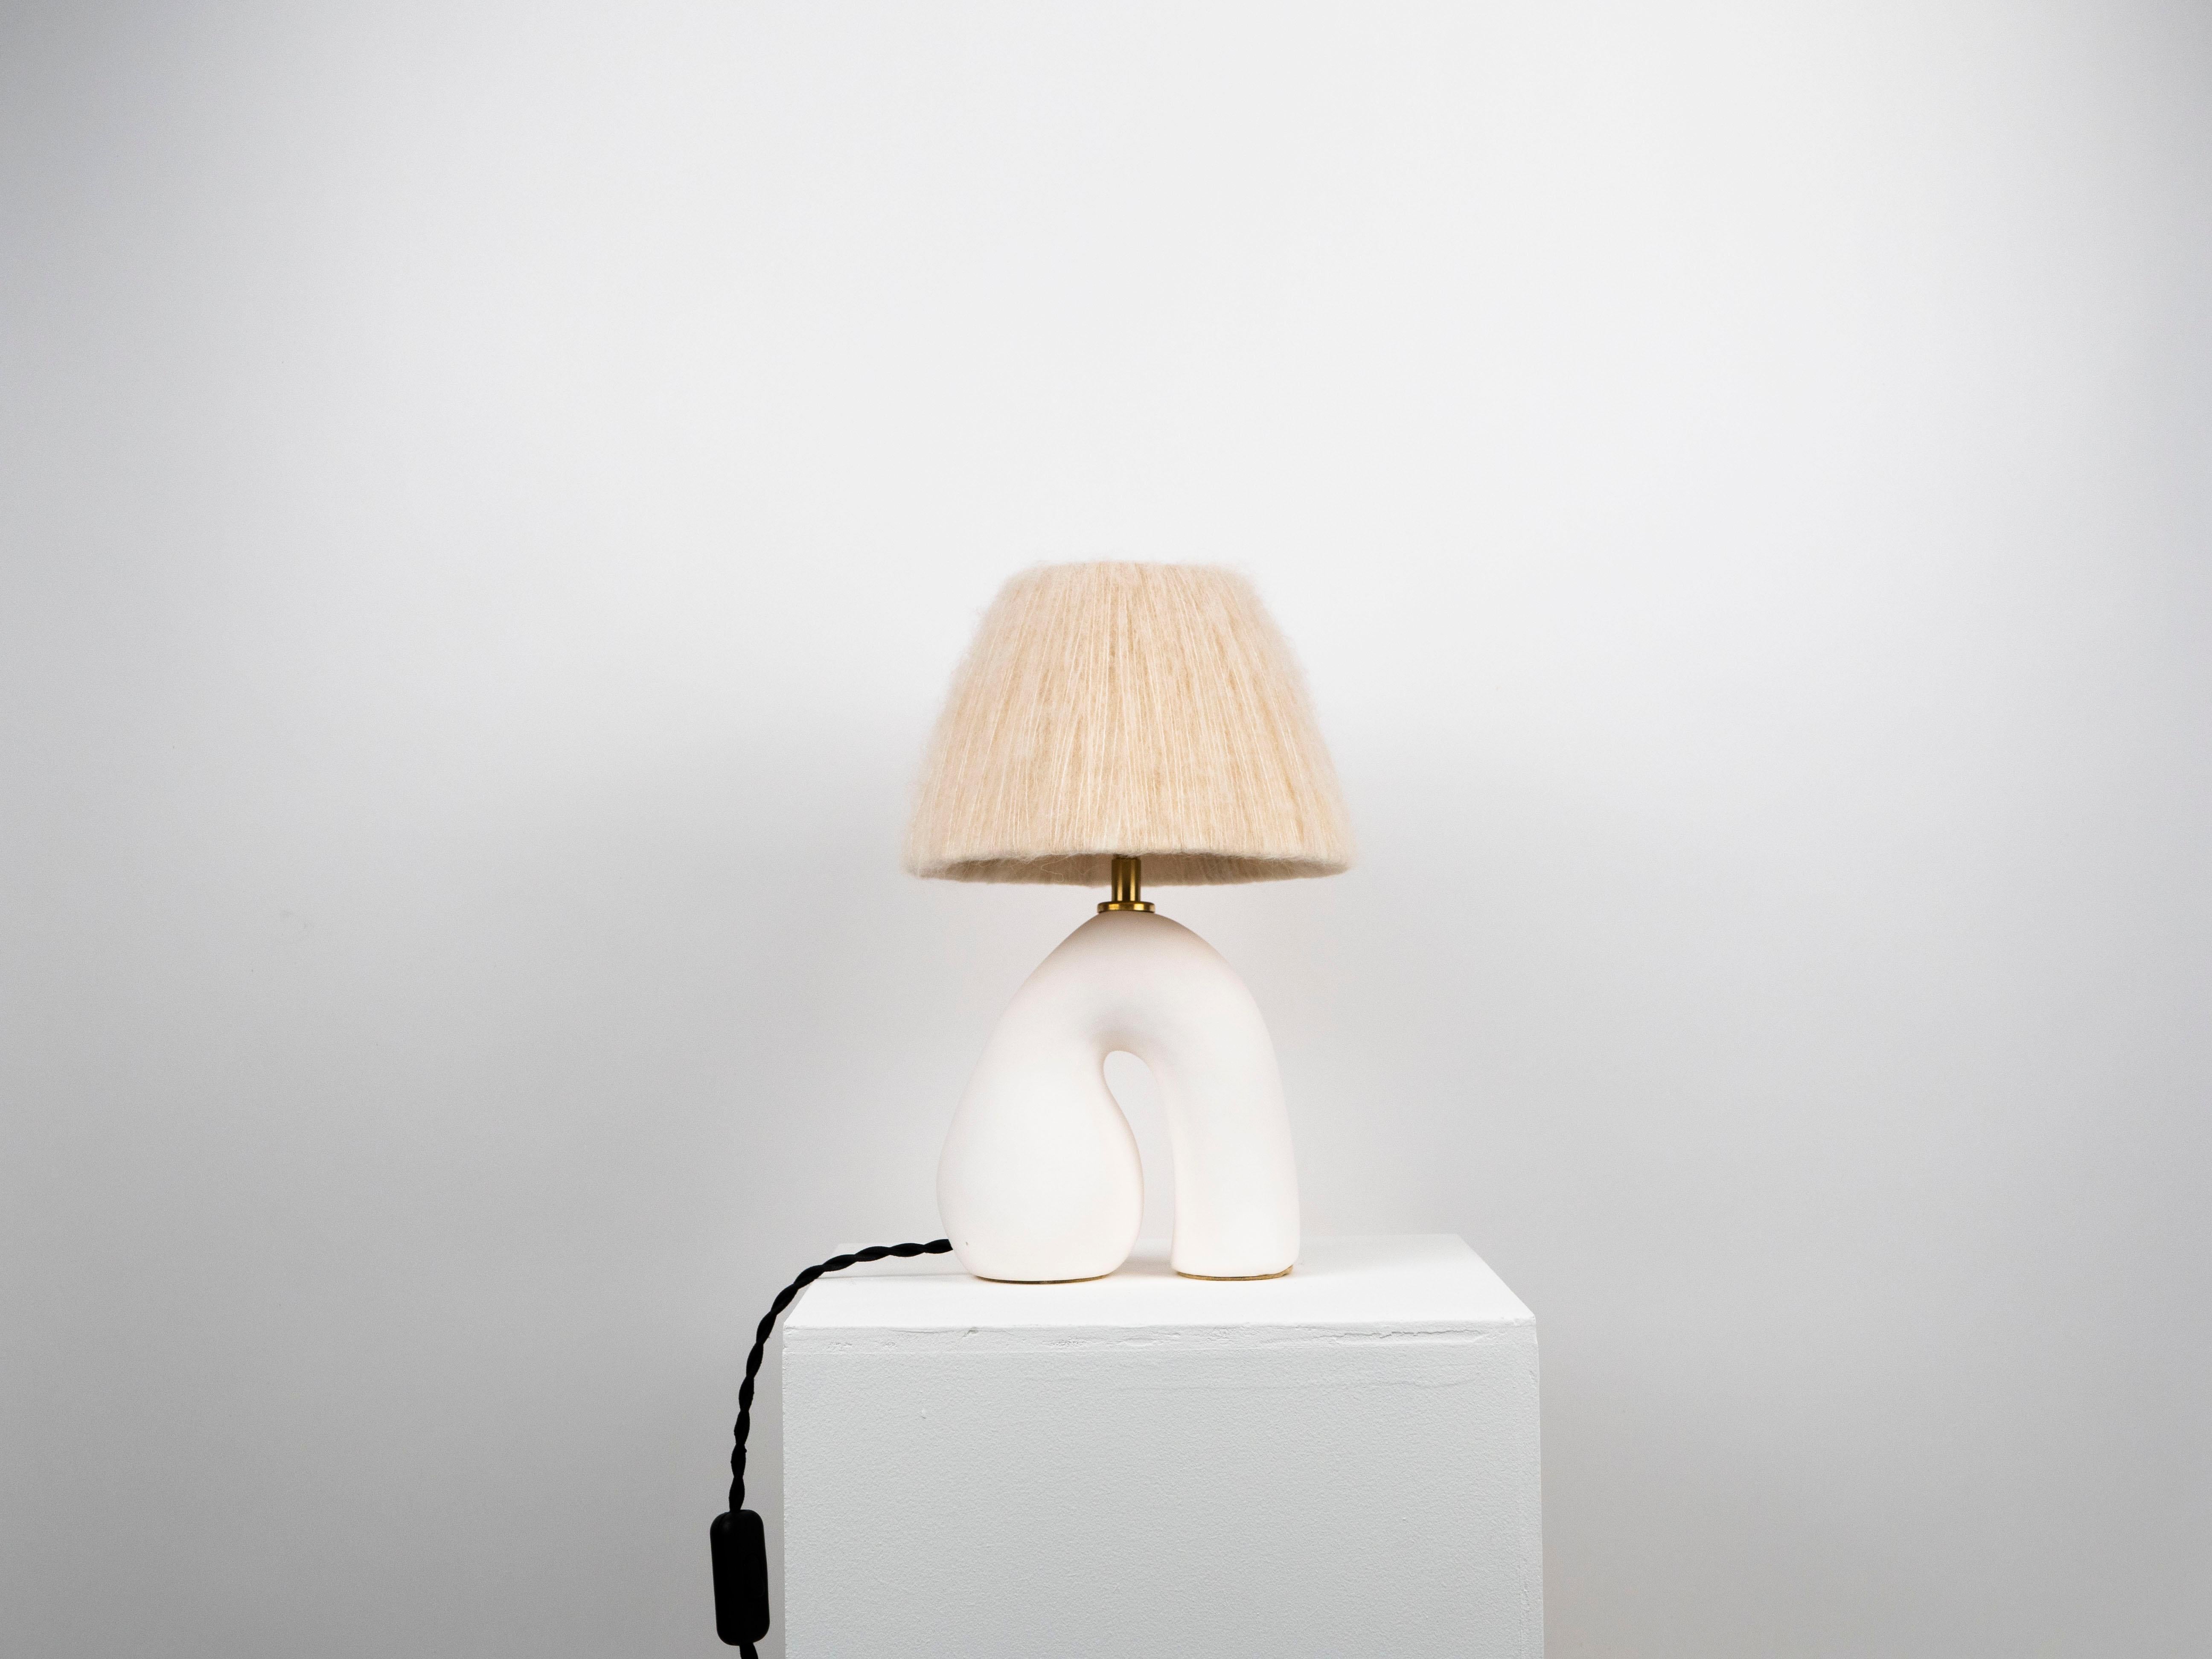 White base with a Matte finish and Cream wool shade

Lamp & Shade: 33 x 20 x 20cm 

Estimated processing time is 2 weeks from order confirmation

Pictured with a Mini Globe LED E27 Bulb. Bulb not included

To pair this base with a shade in an